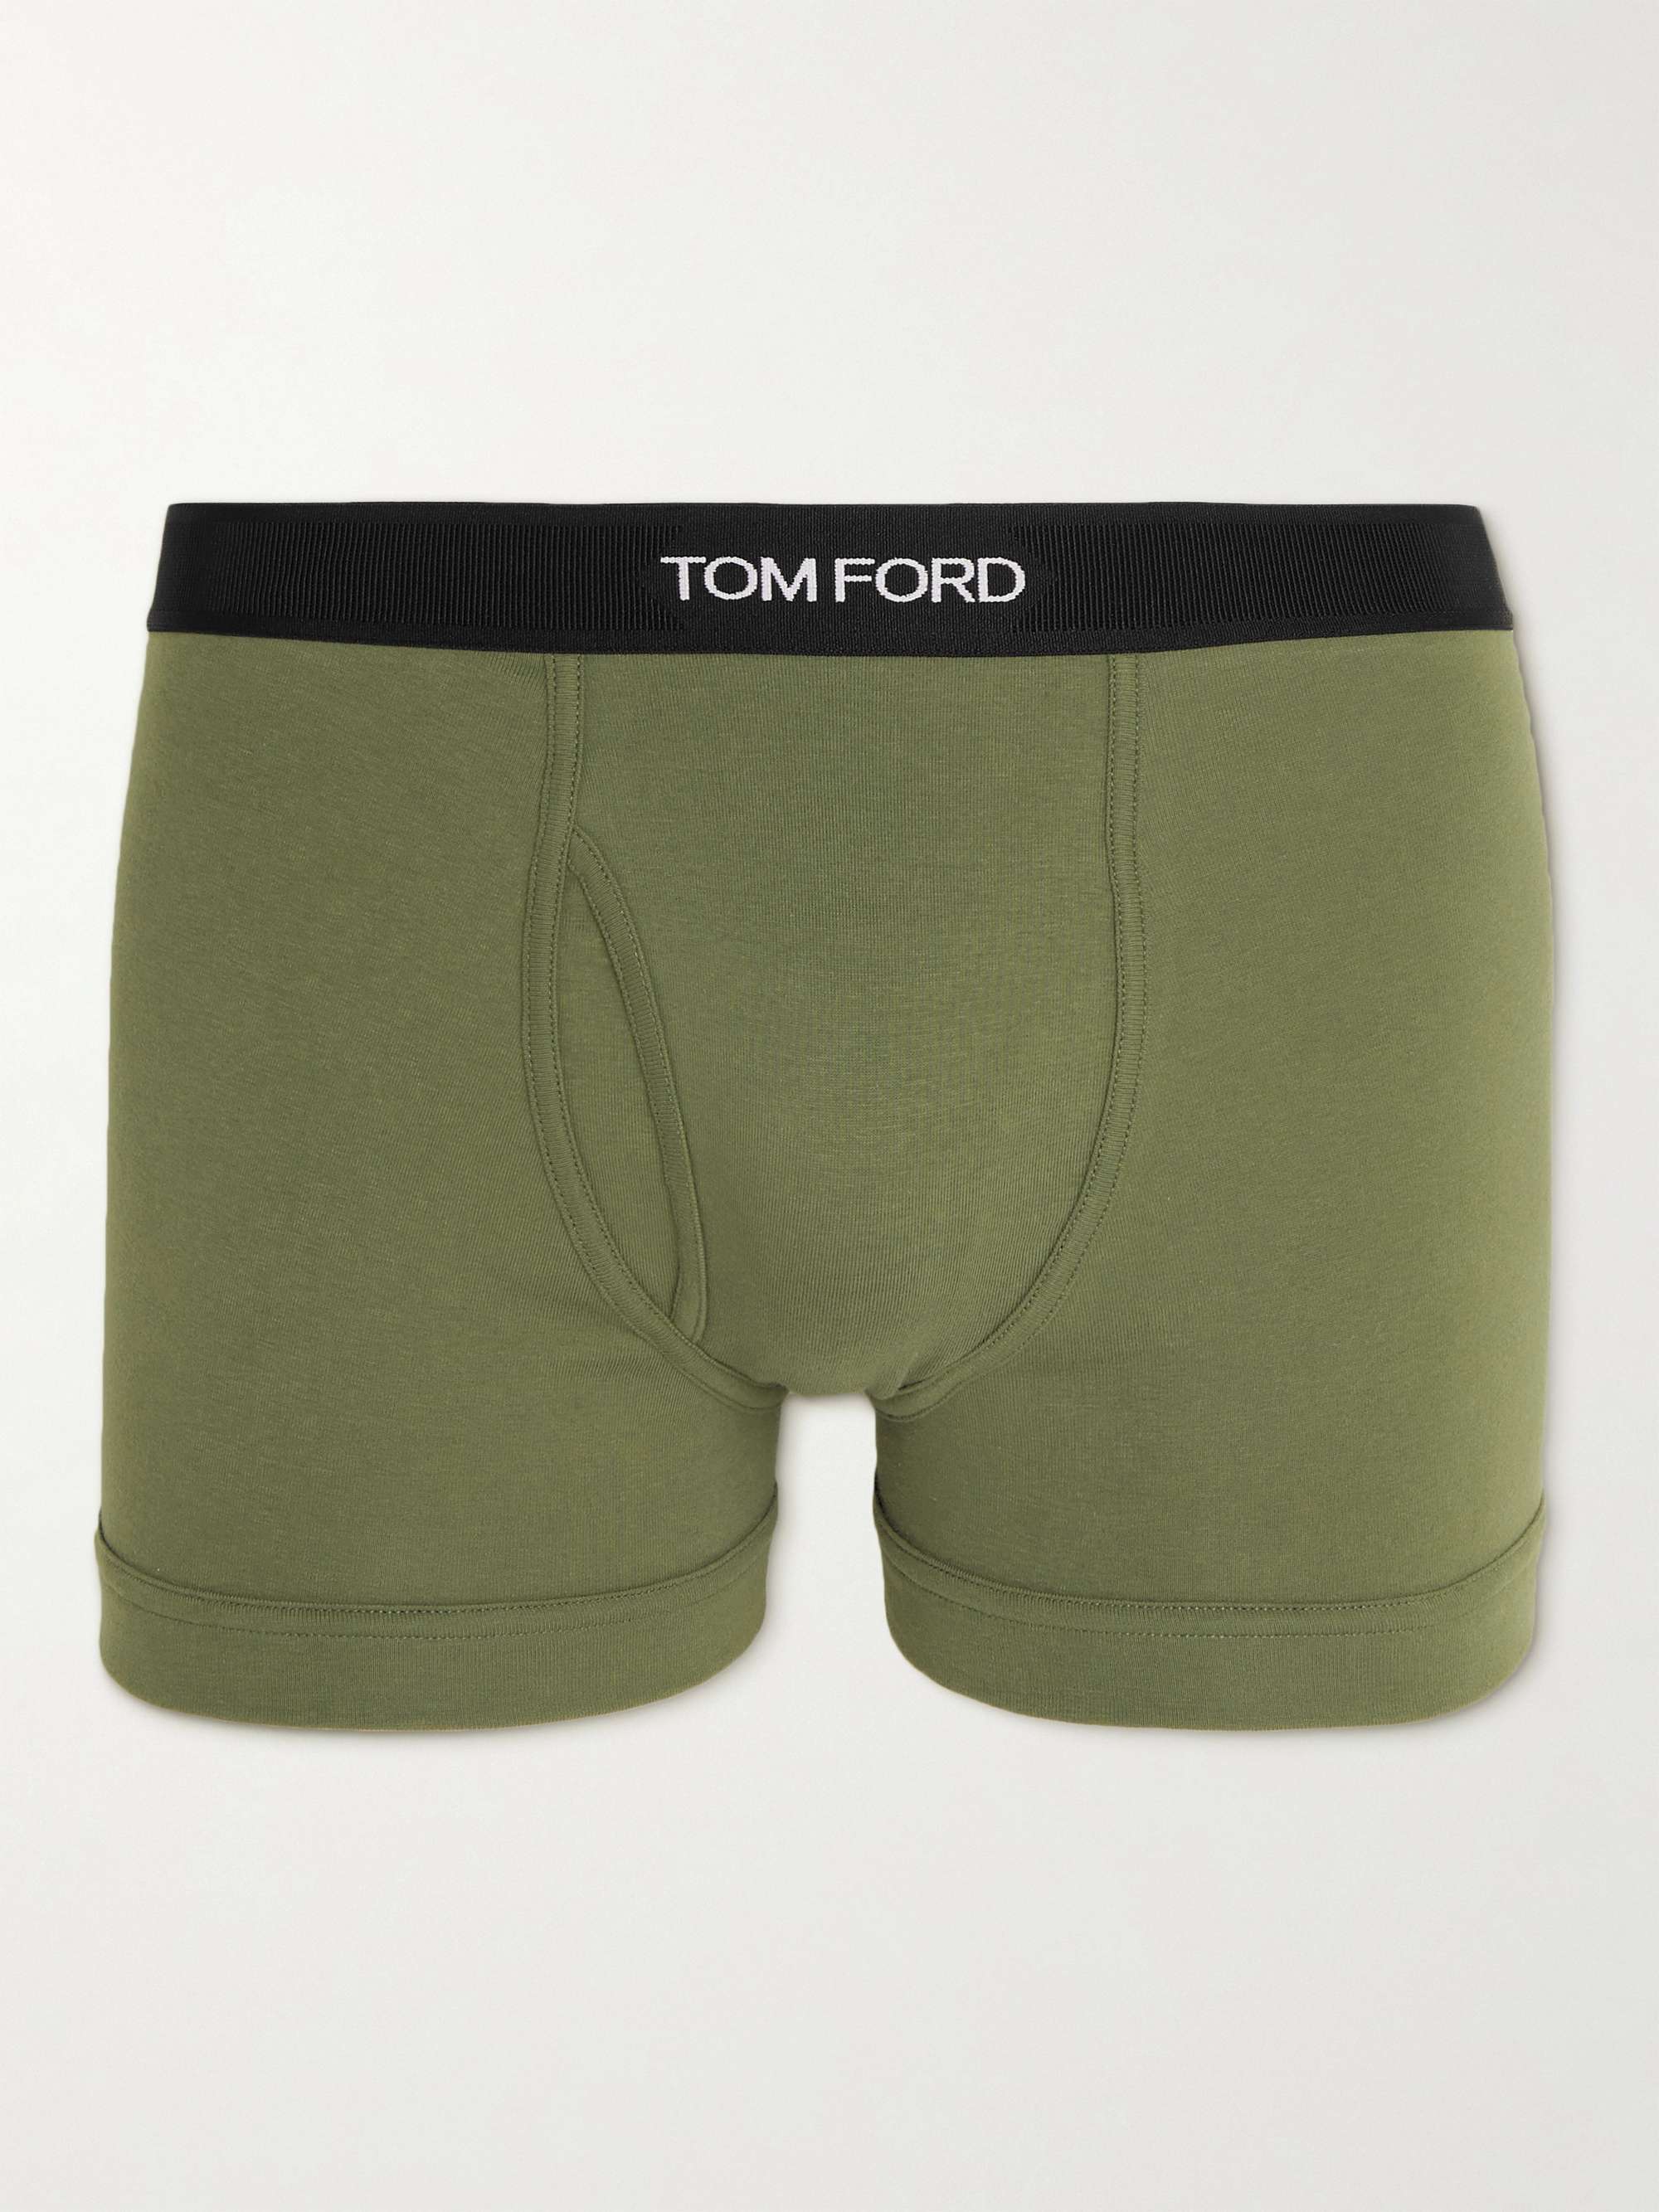 Tom Ford Stretch-cotton Jersey Briefs in Green for Men Mens Clothing Underwear Boxers briefs 